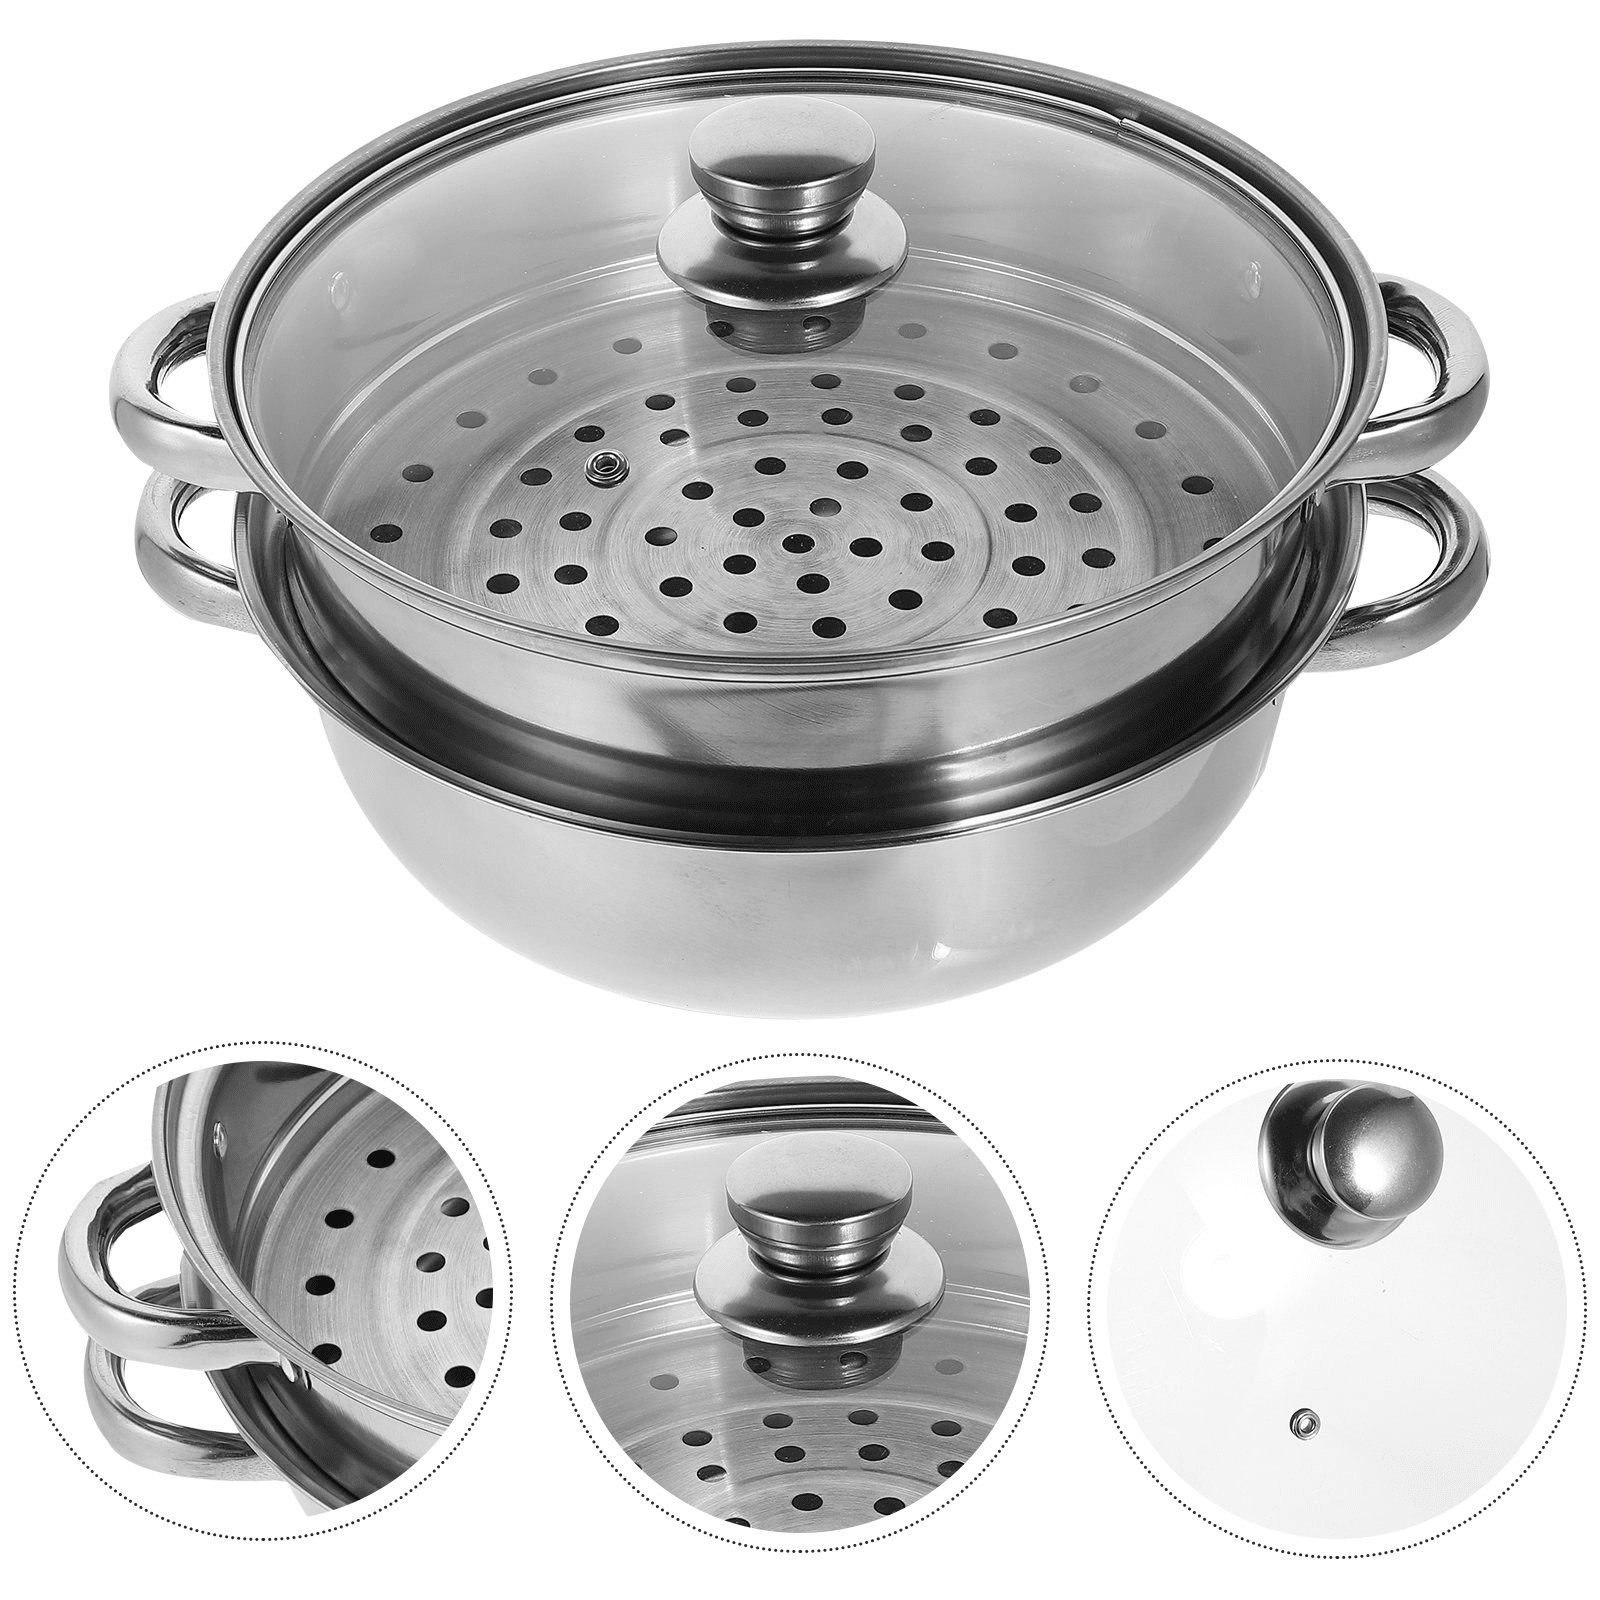  2 Piece Stainless Steel Steamer Pot Set with Glass Lid and  handle,for Steamer Cooking,Casserole,Saucepan (2 layer): Home & Kitchen